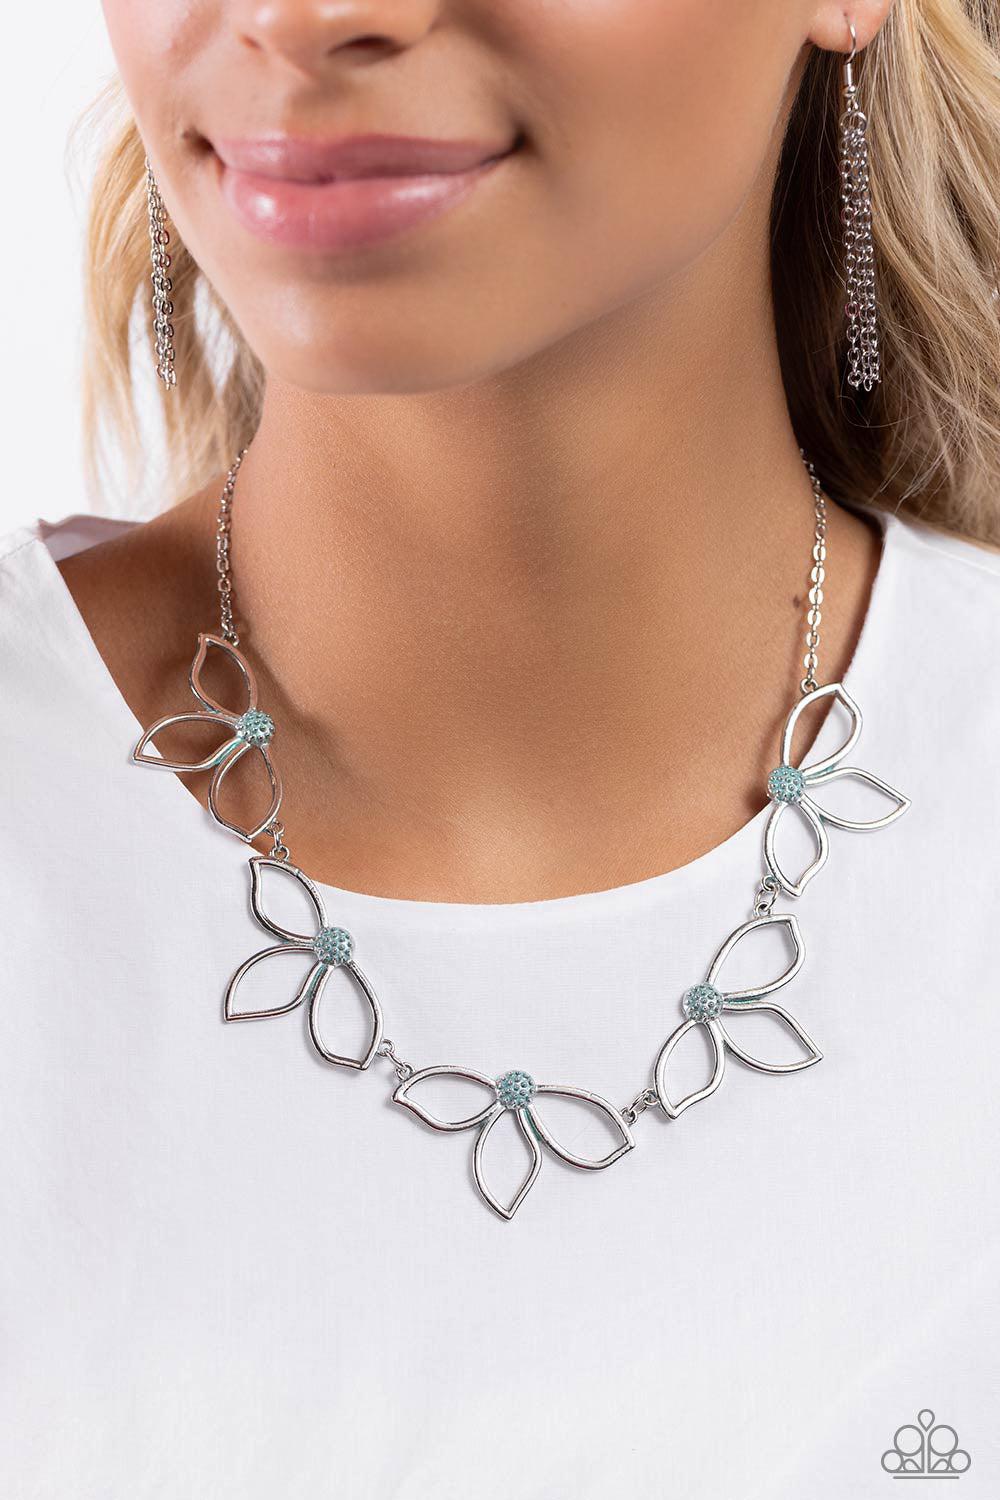 Petal Pageantry Blue &amp; Silver Floral Necklace - Paparazzi Accessories-on model - CarasShop.com - $5 Jewelry by Cara Jewels